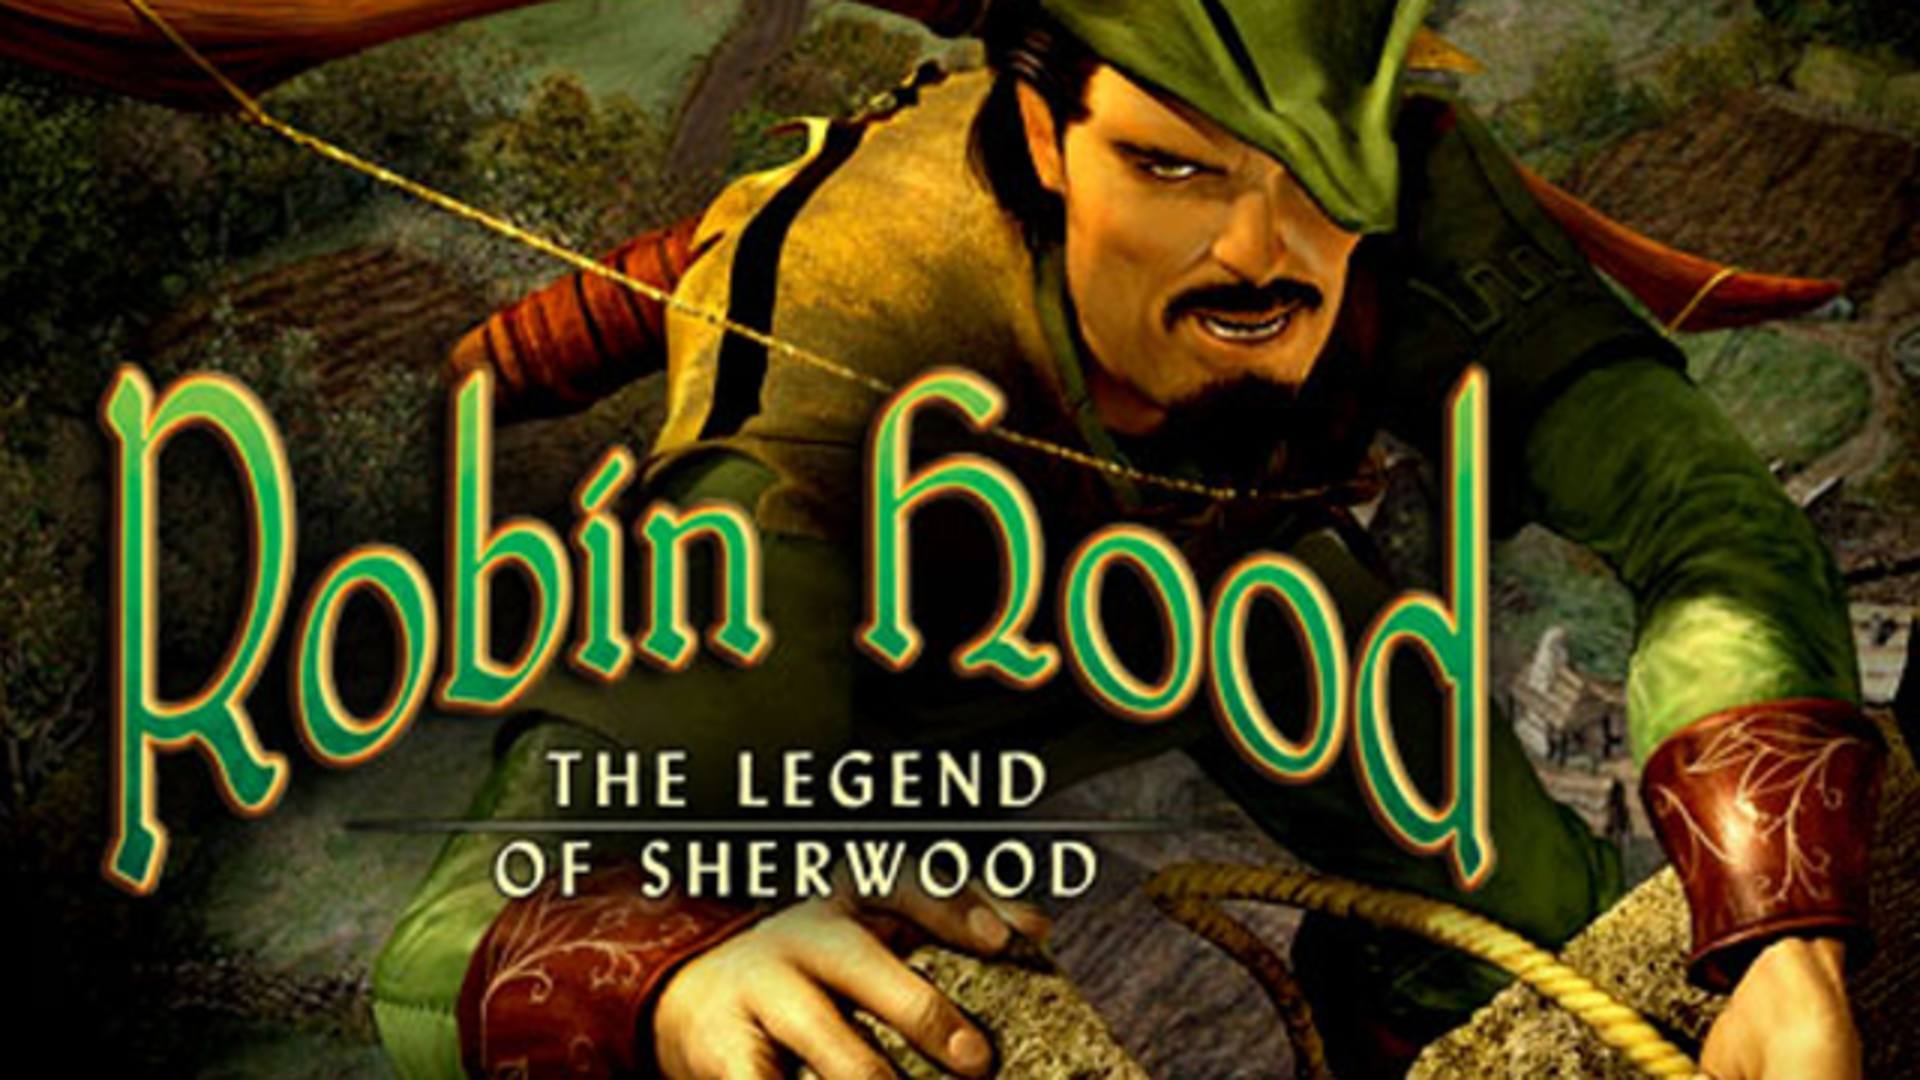 robin hood the legend of sherwood system requirements